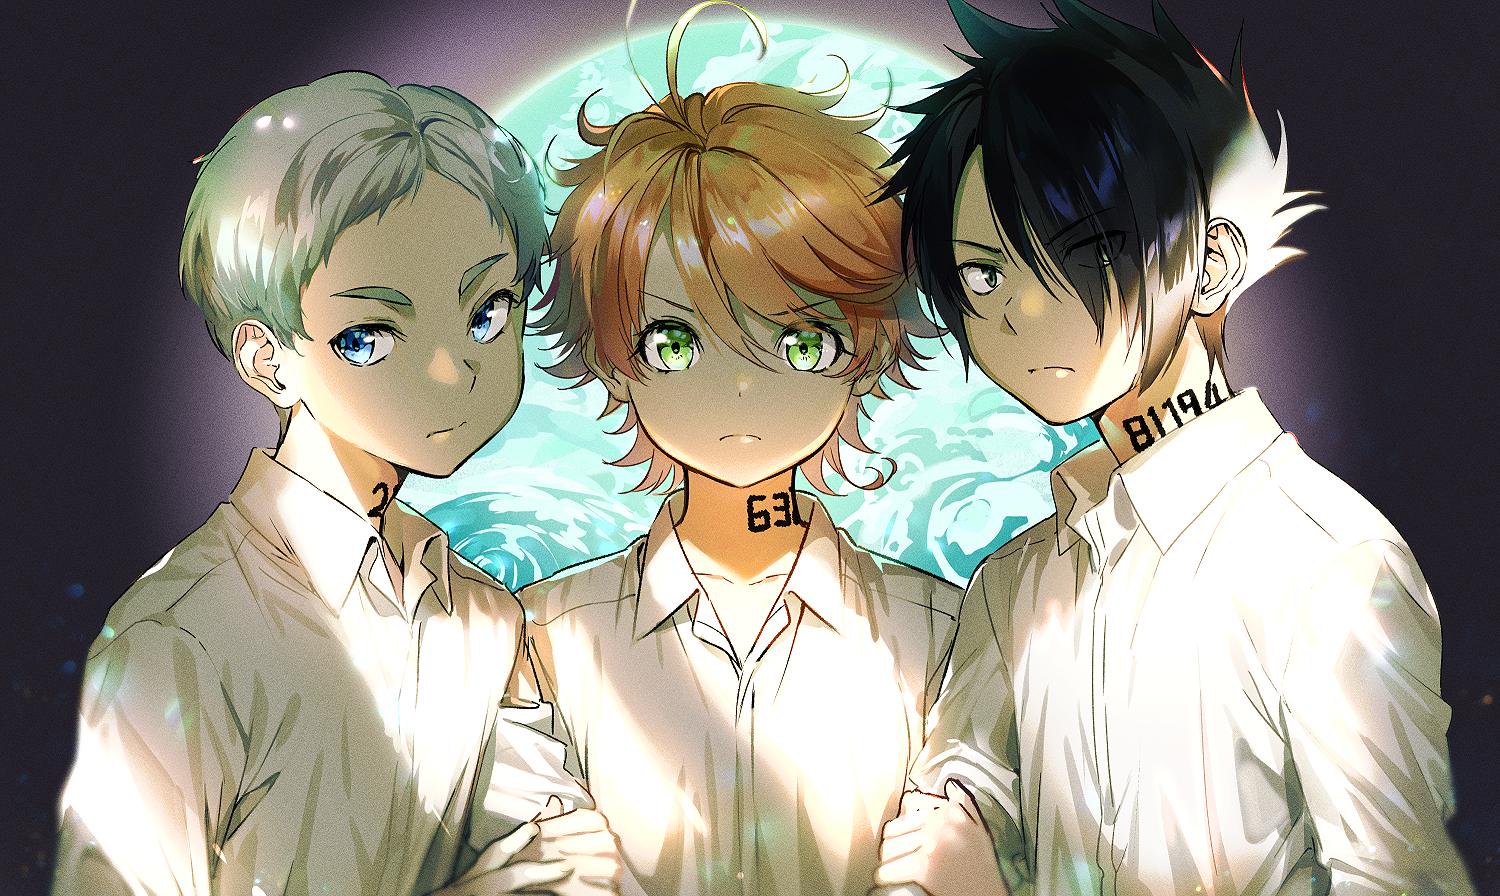 The Promised Neverland - wide 6